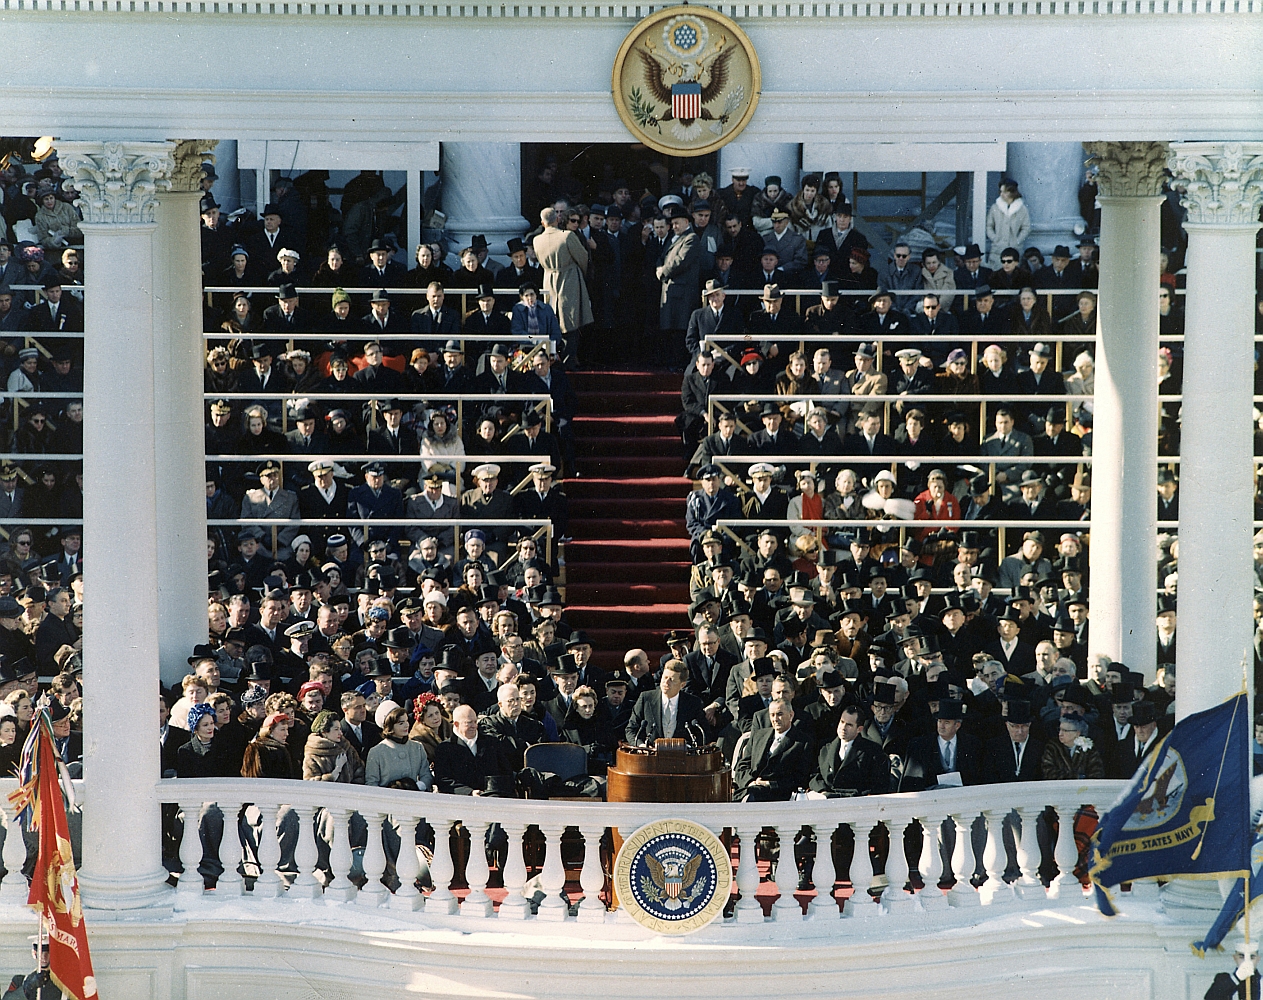 1961: The Inauguration of President Kennedy